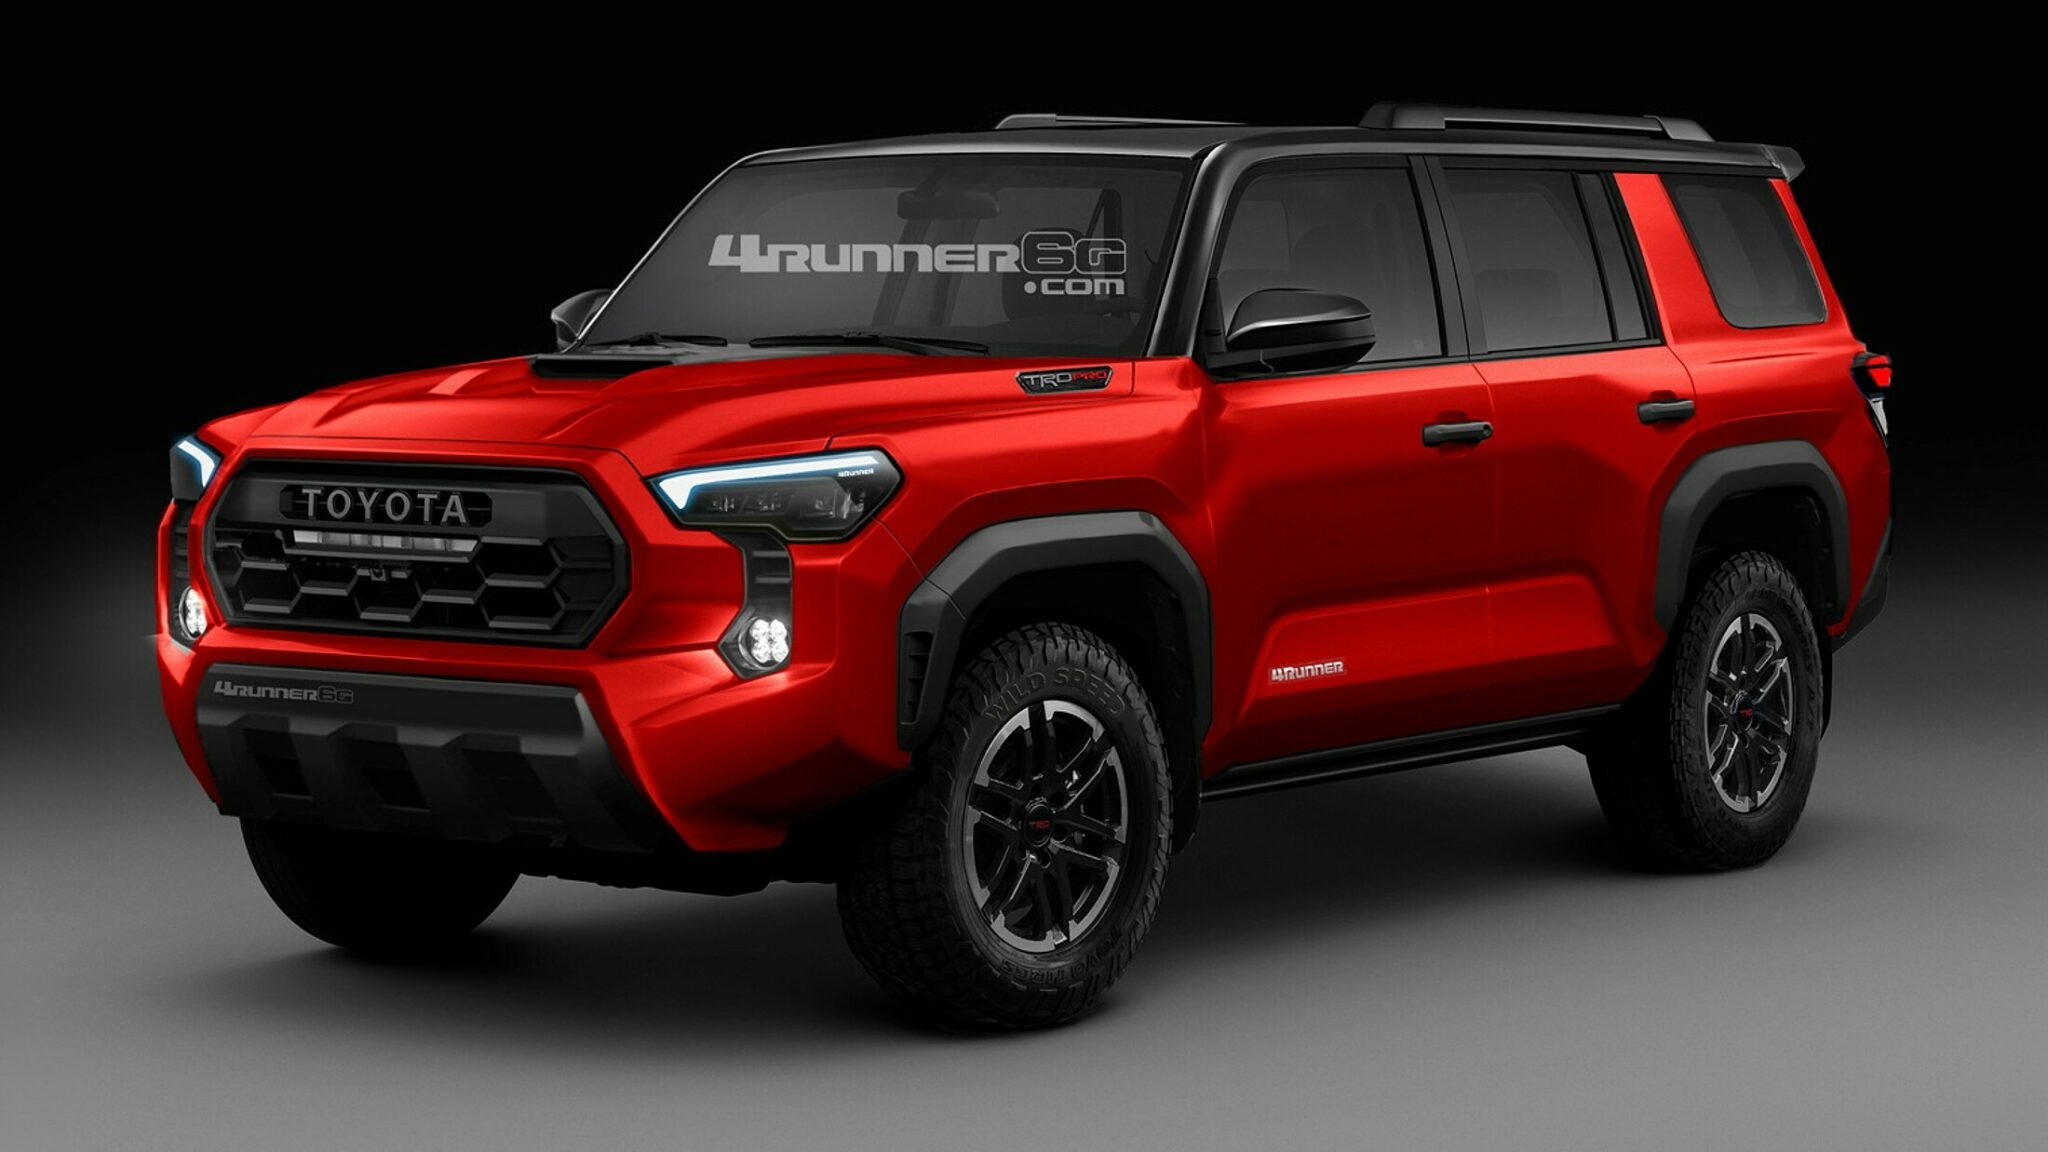 2025 Toyota 4Runner Rendered, Is Expected To Drop V6 For 4Cylinder